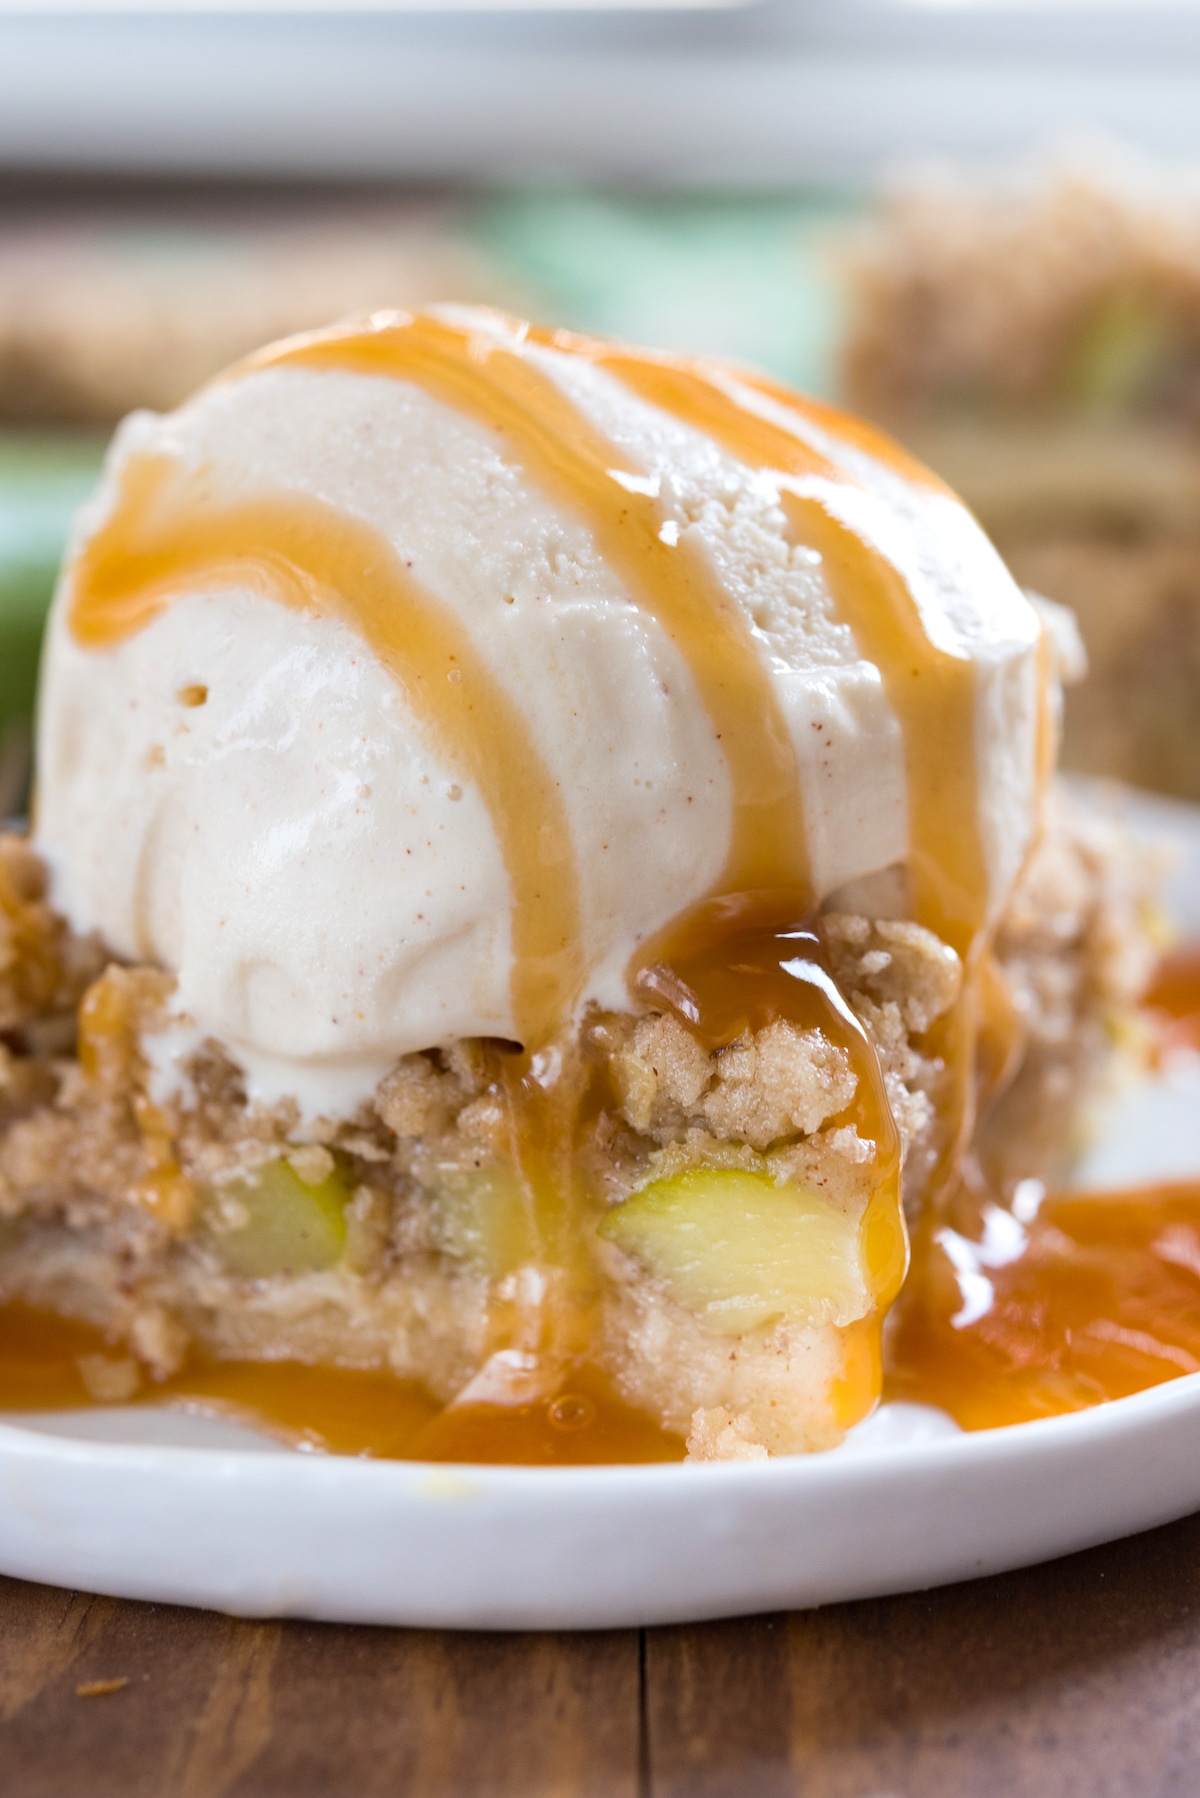 stacked zucchini bars with zucchini baked in and topped with ice cream.